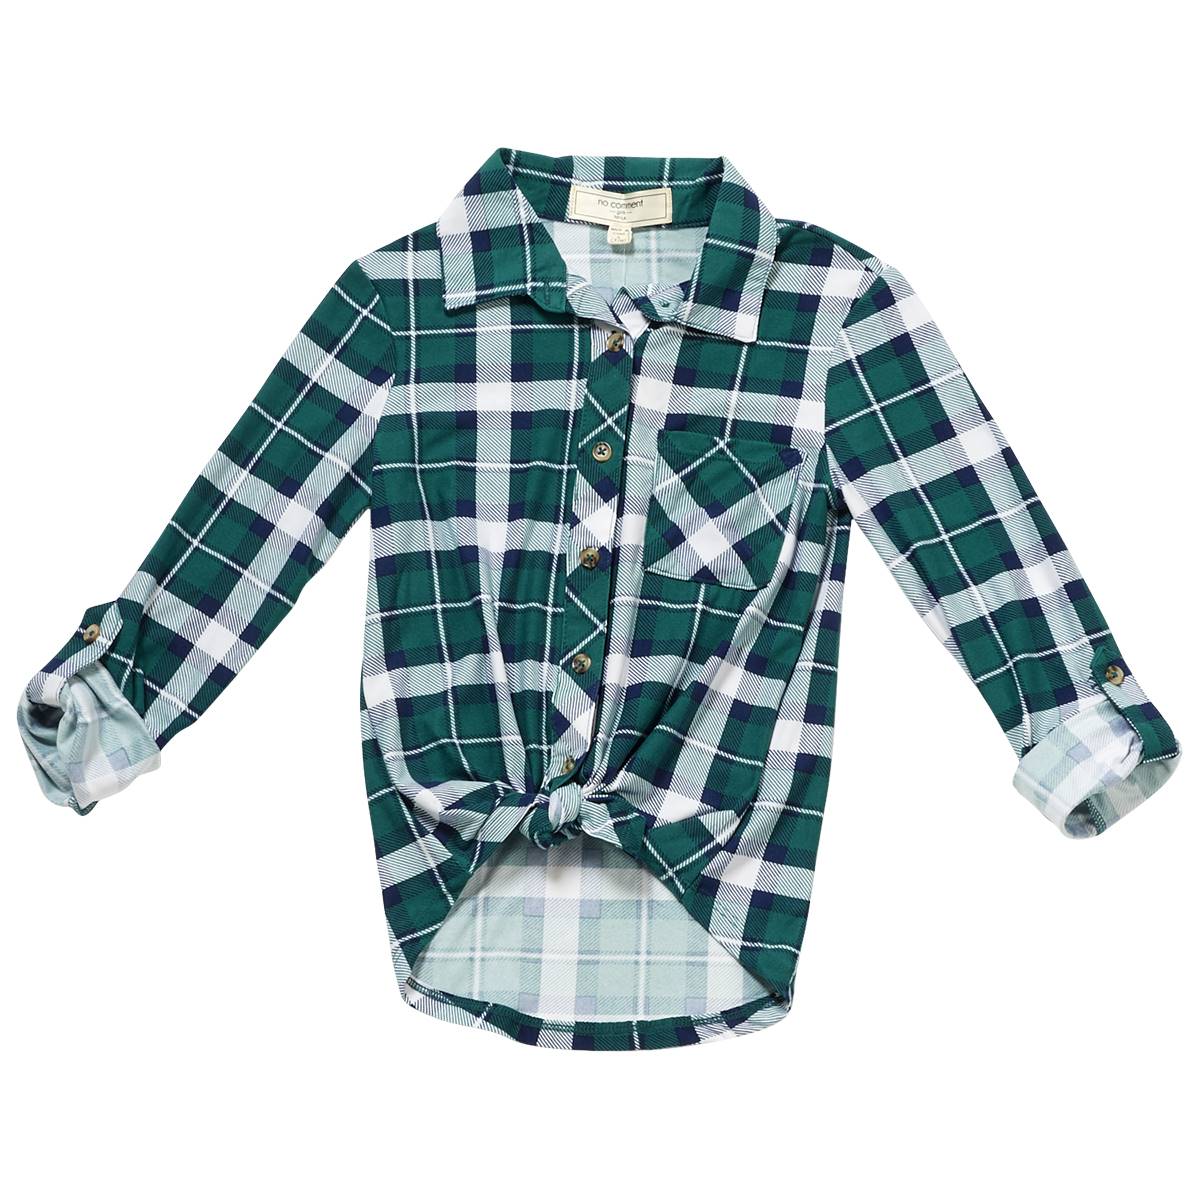 Girls (7-16) No Comment Button Down Top - Adored Plaid